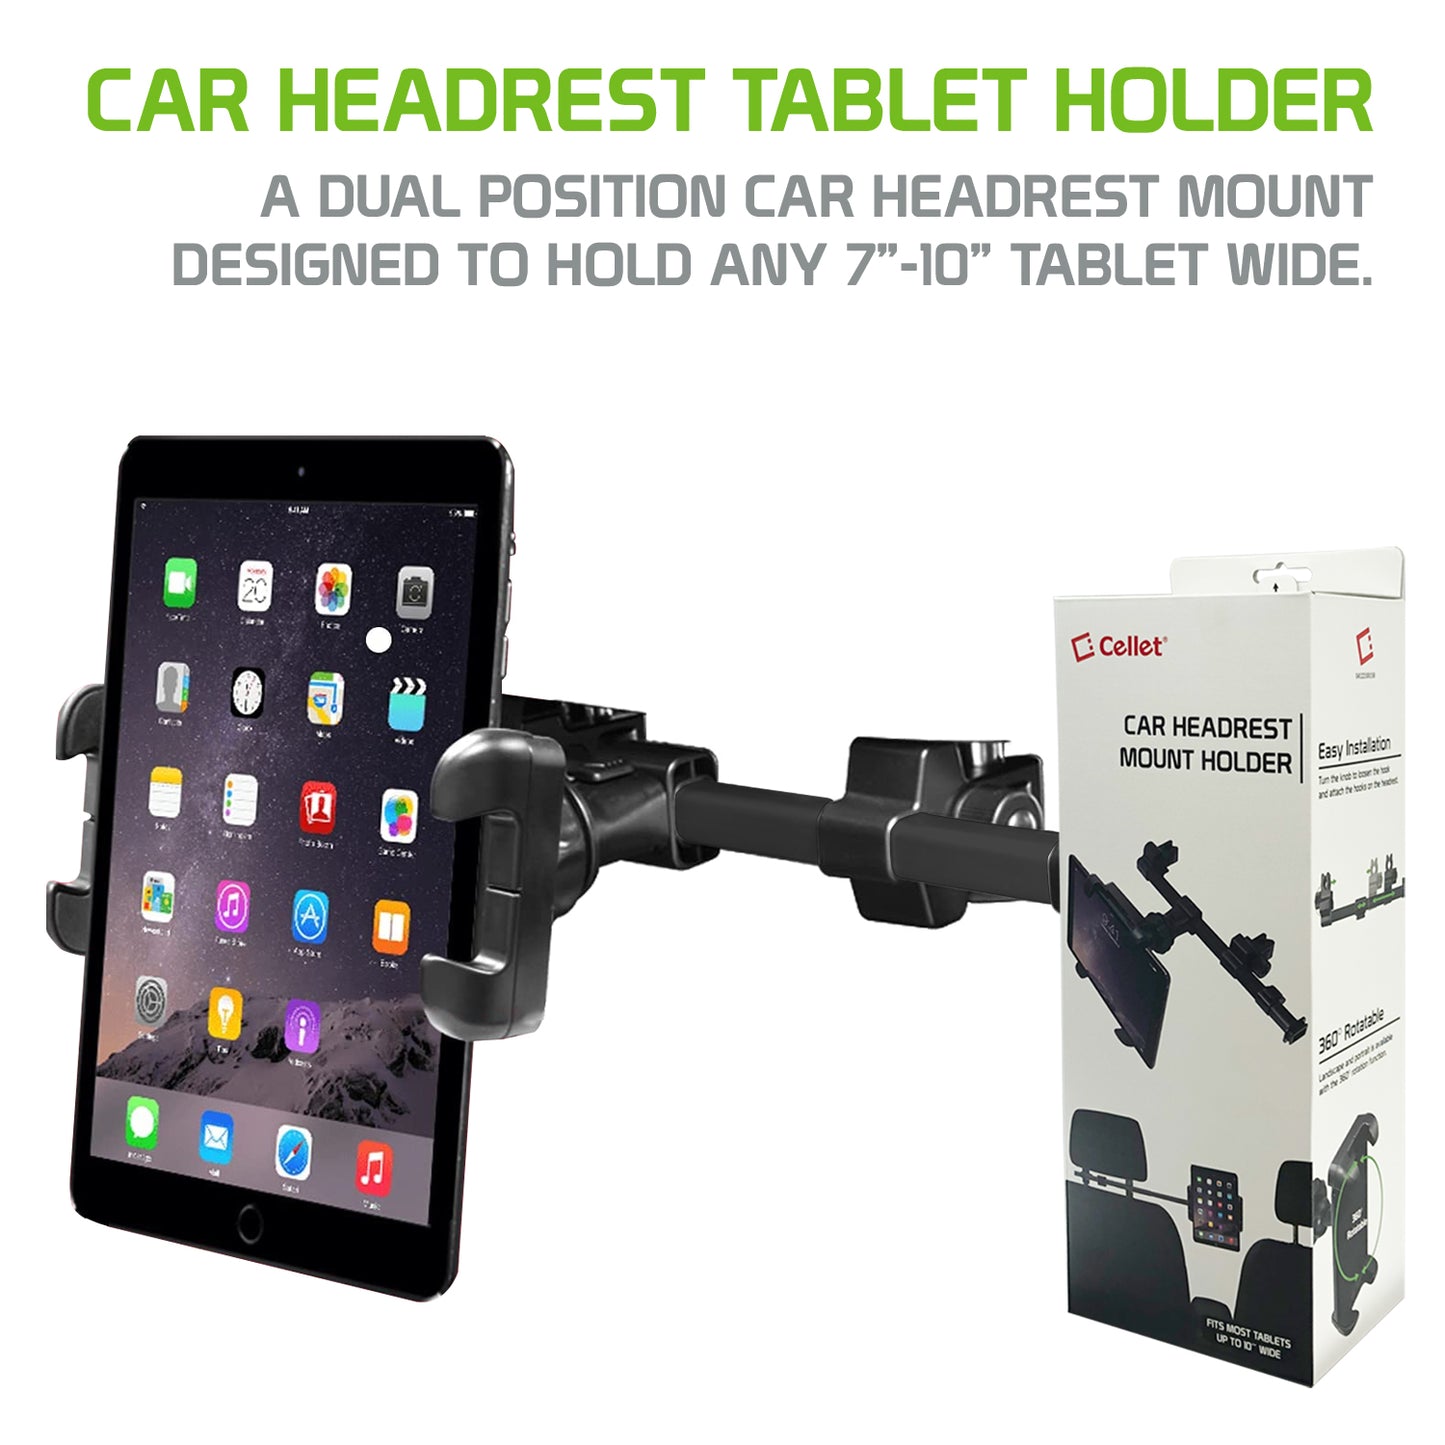 PH360 - Headrest Tablet/Smartphone iPad iPhone Holder, Mount Holder with Extendable Telescopic Arm for Apple iPad, iPhones (fits up to 10”) - Black